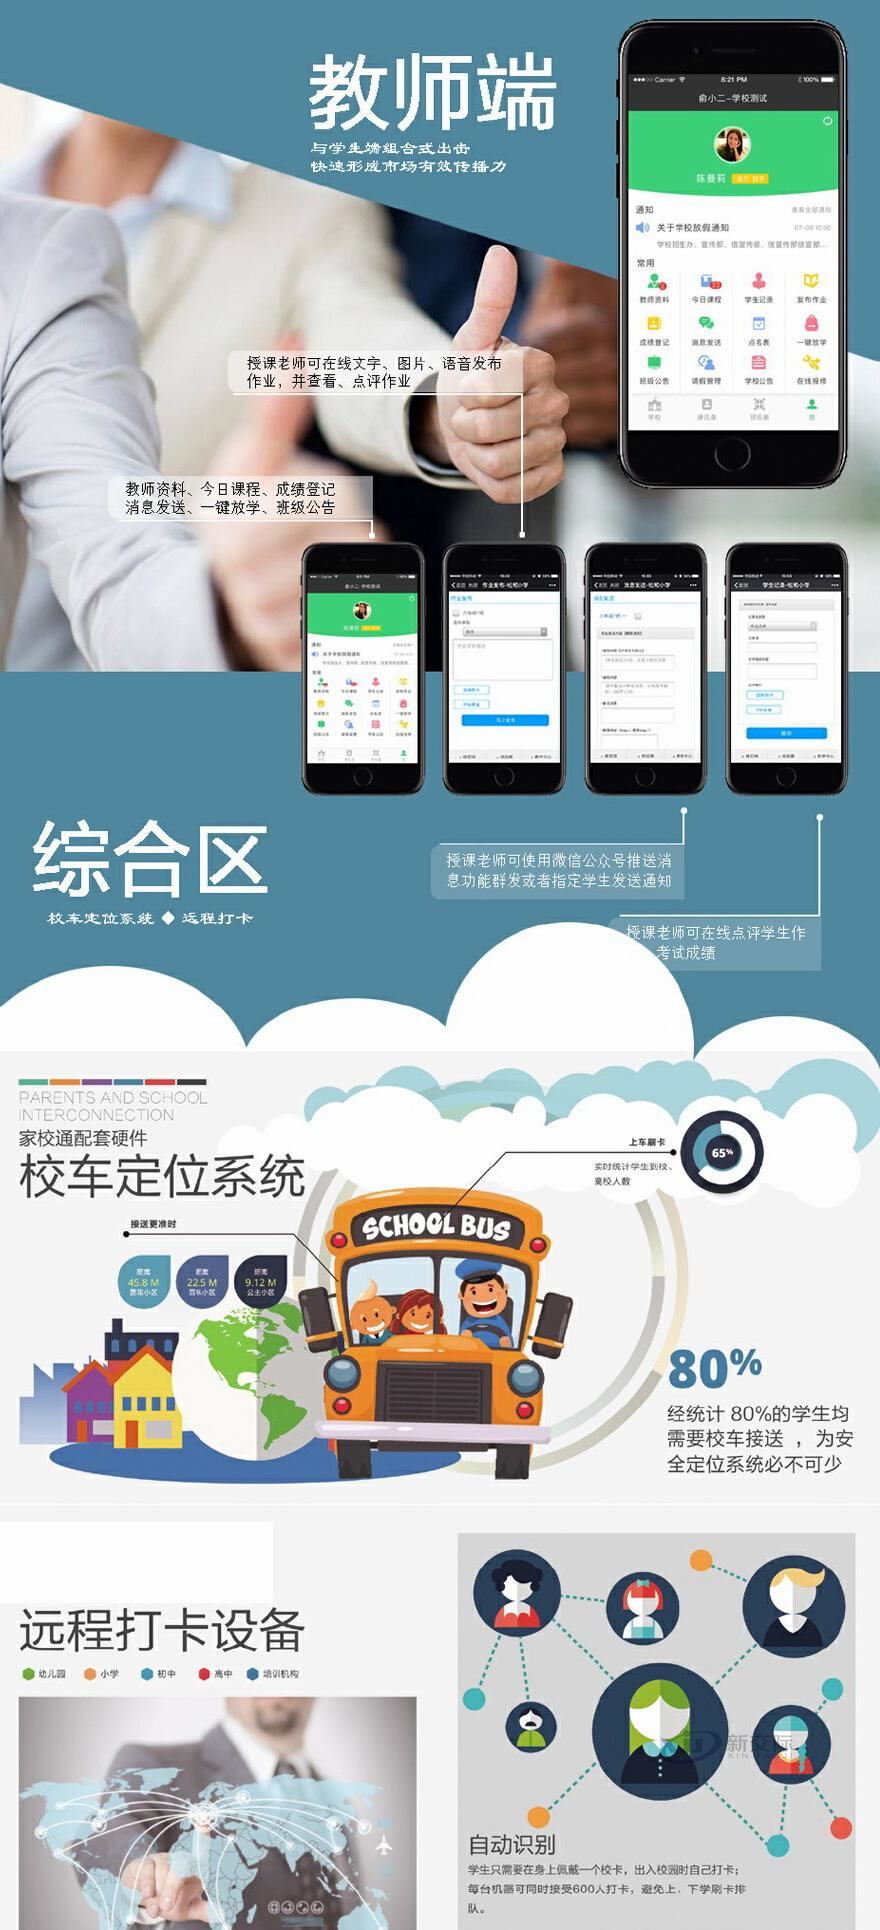 Band Smart Campus Tencent Smart Campus Solution Campus Card One Card System Walker Smart Community Network Behavior Monitoring and Management System